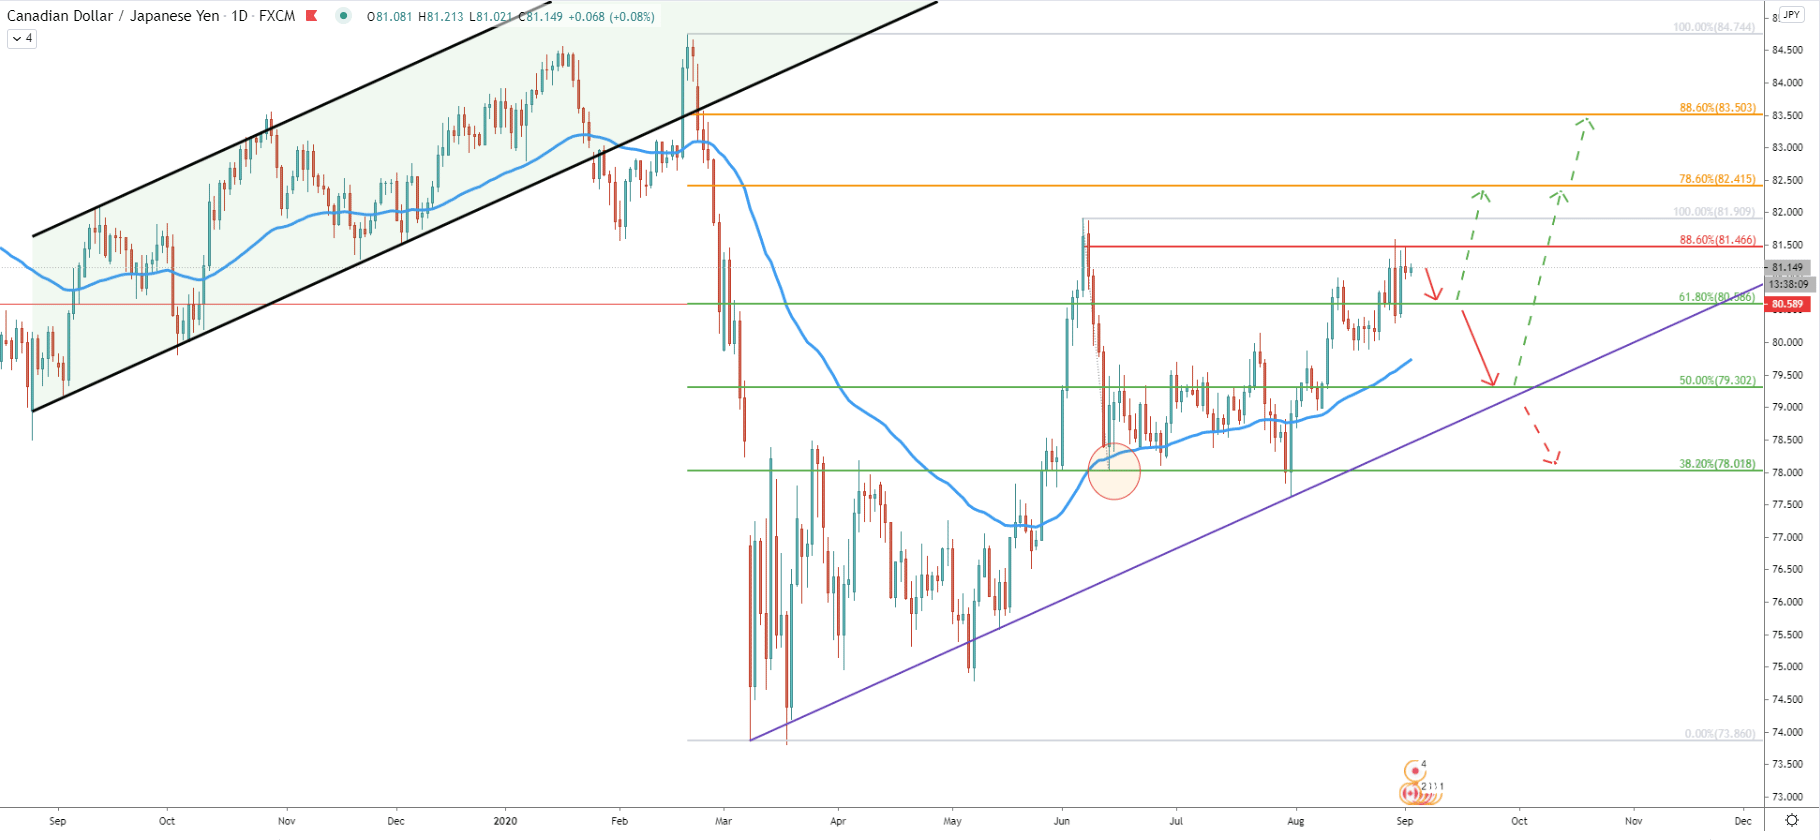 CAD/JPY Daily Technical Analysis 2 Sep 2020